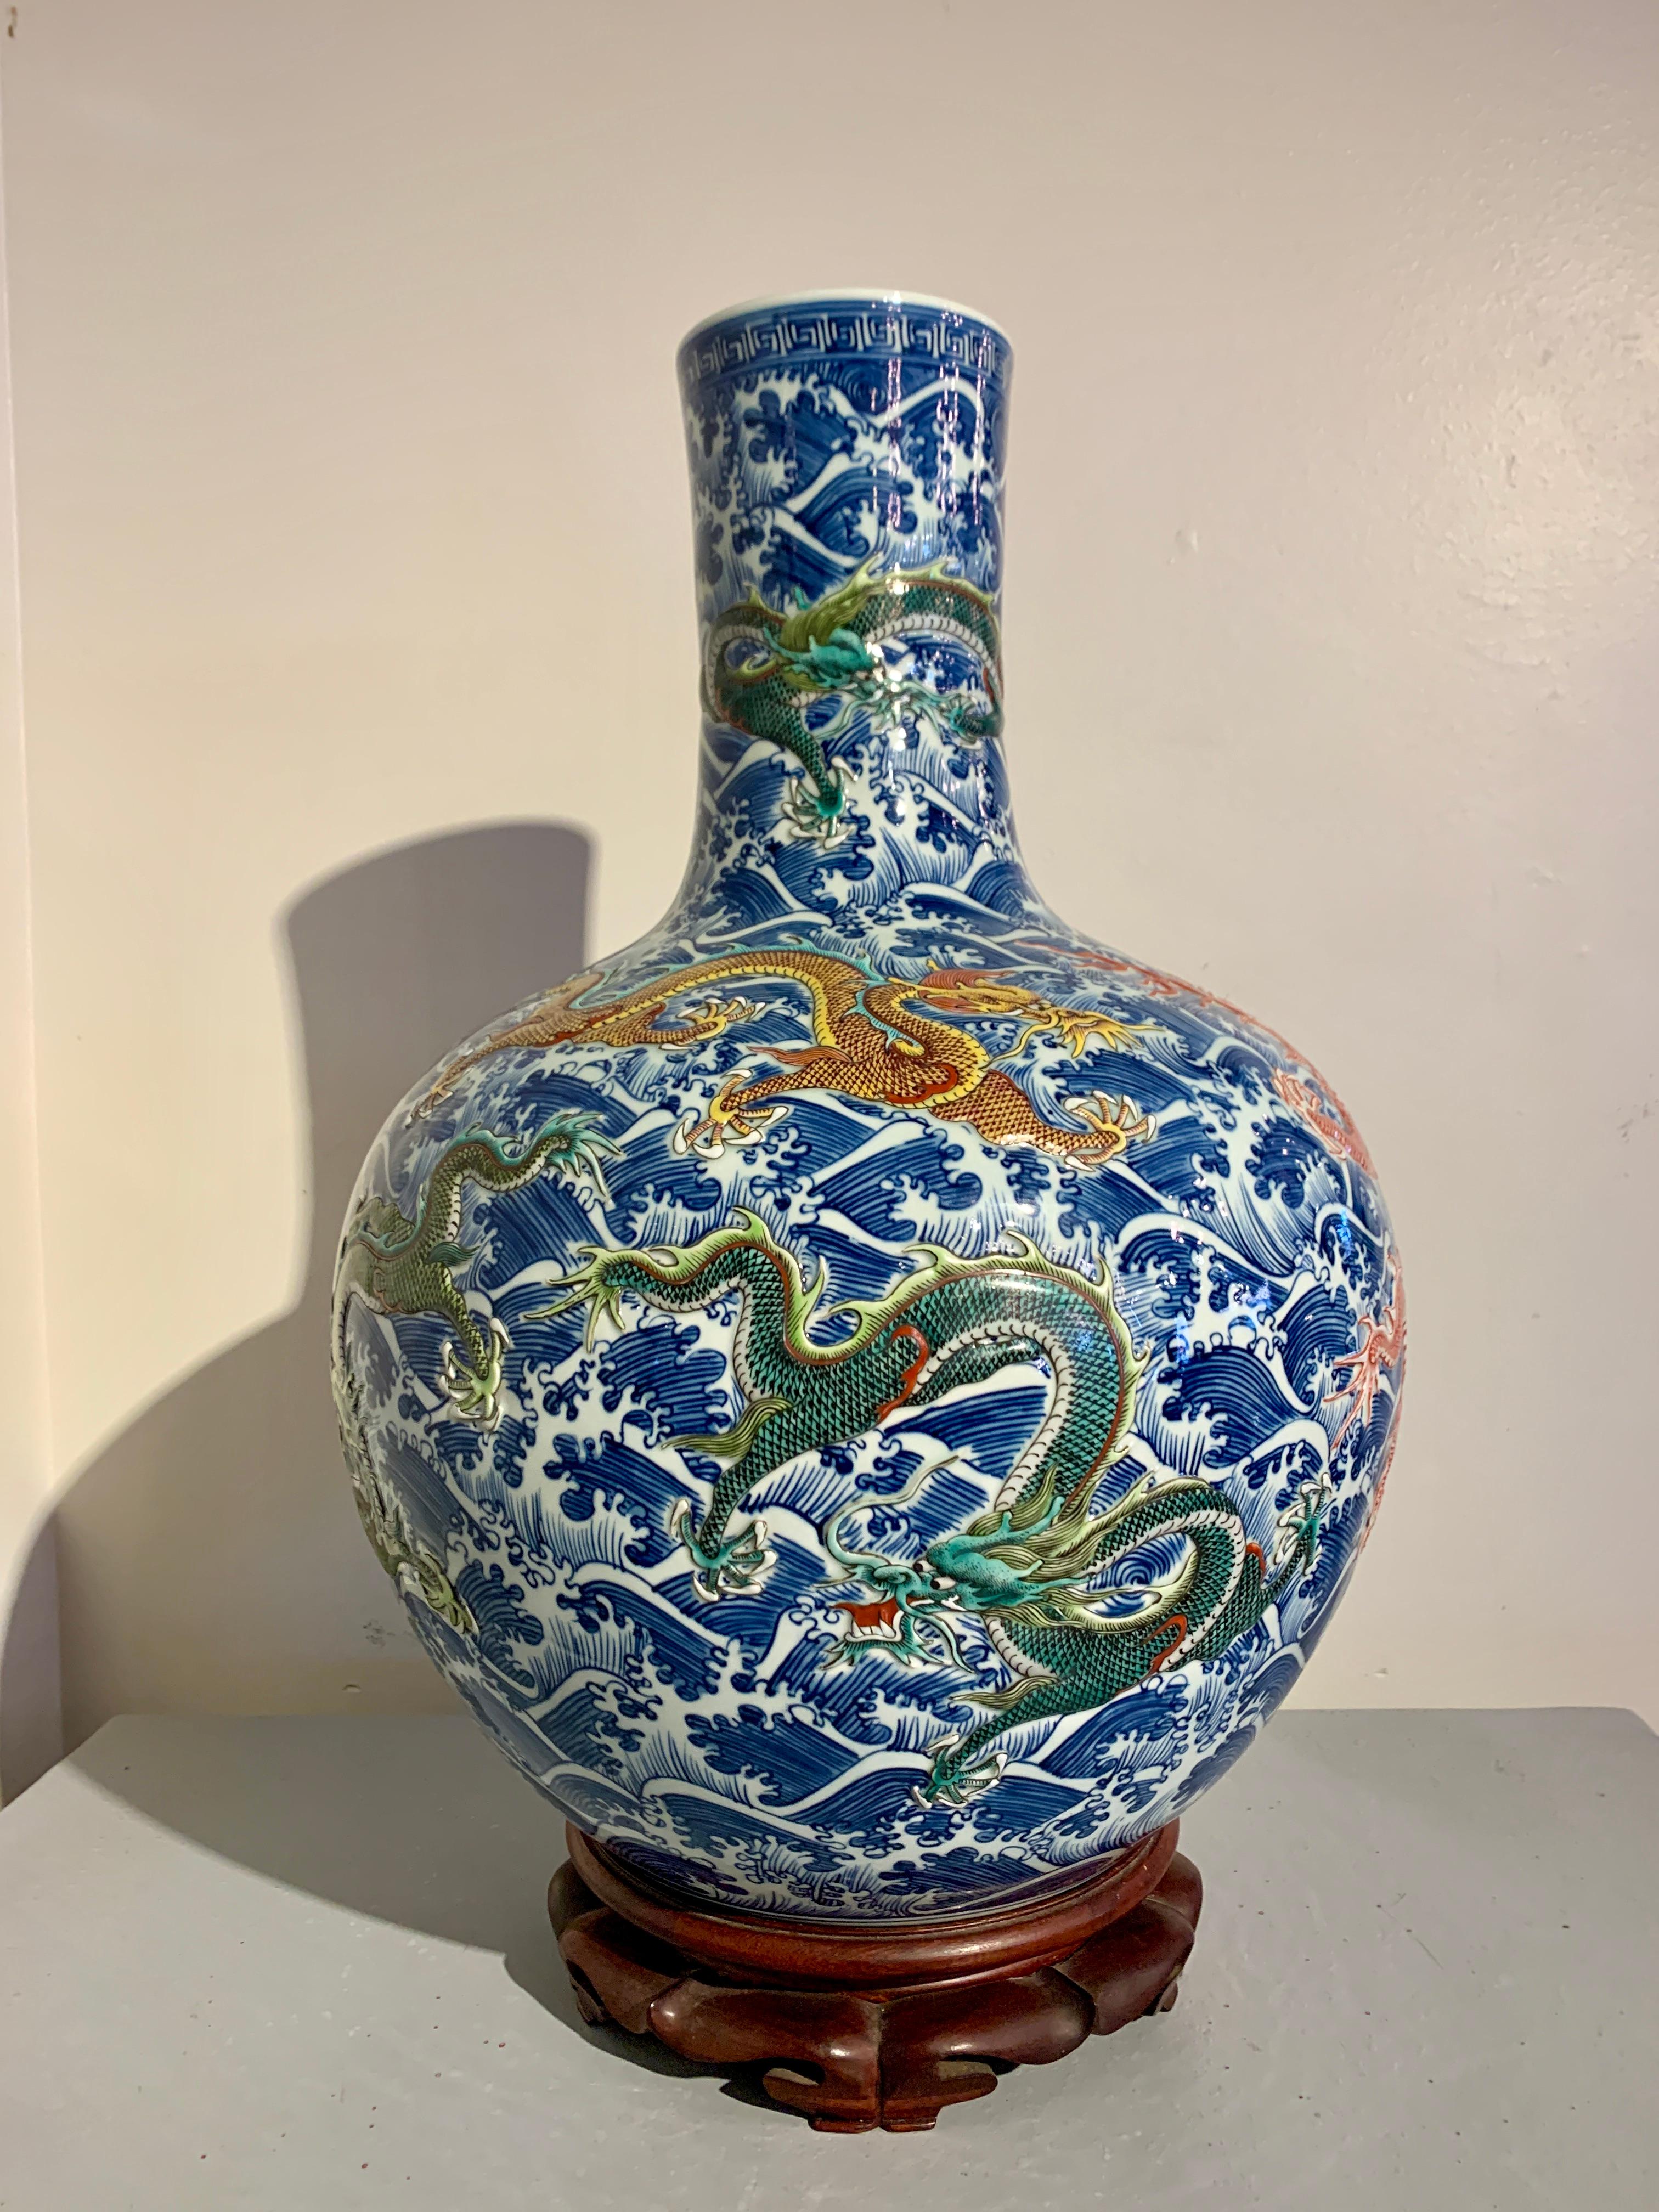 A large and impressive Chinese porcelain 